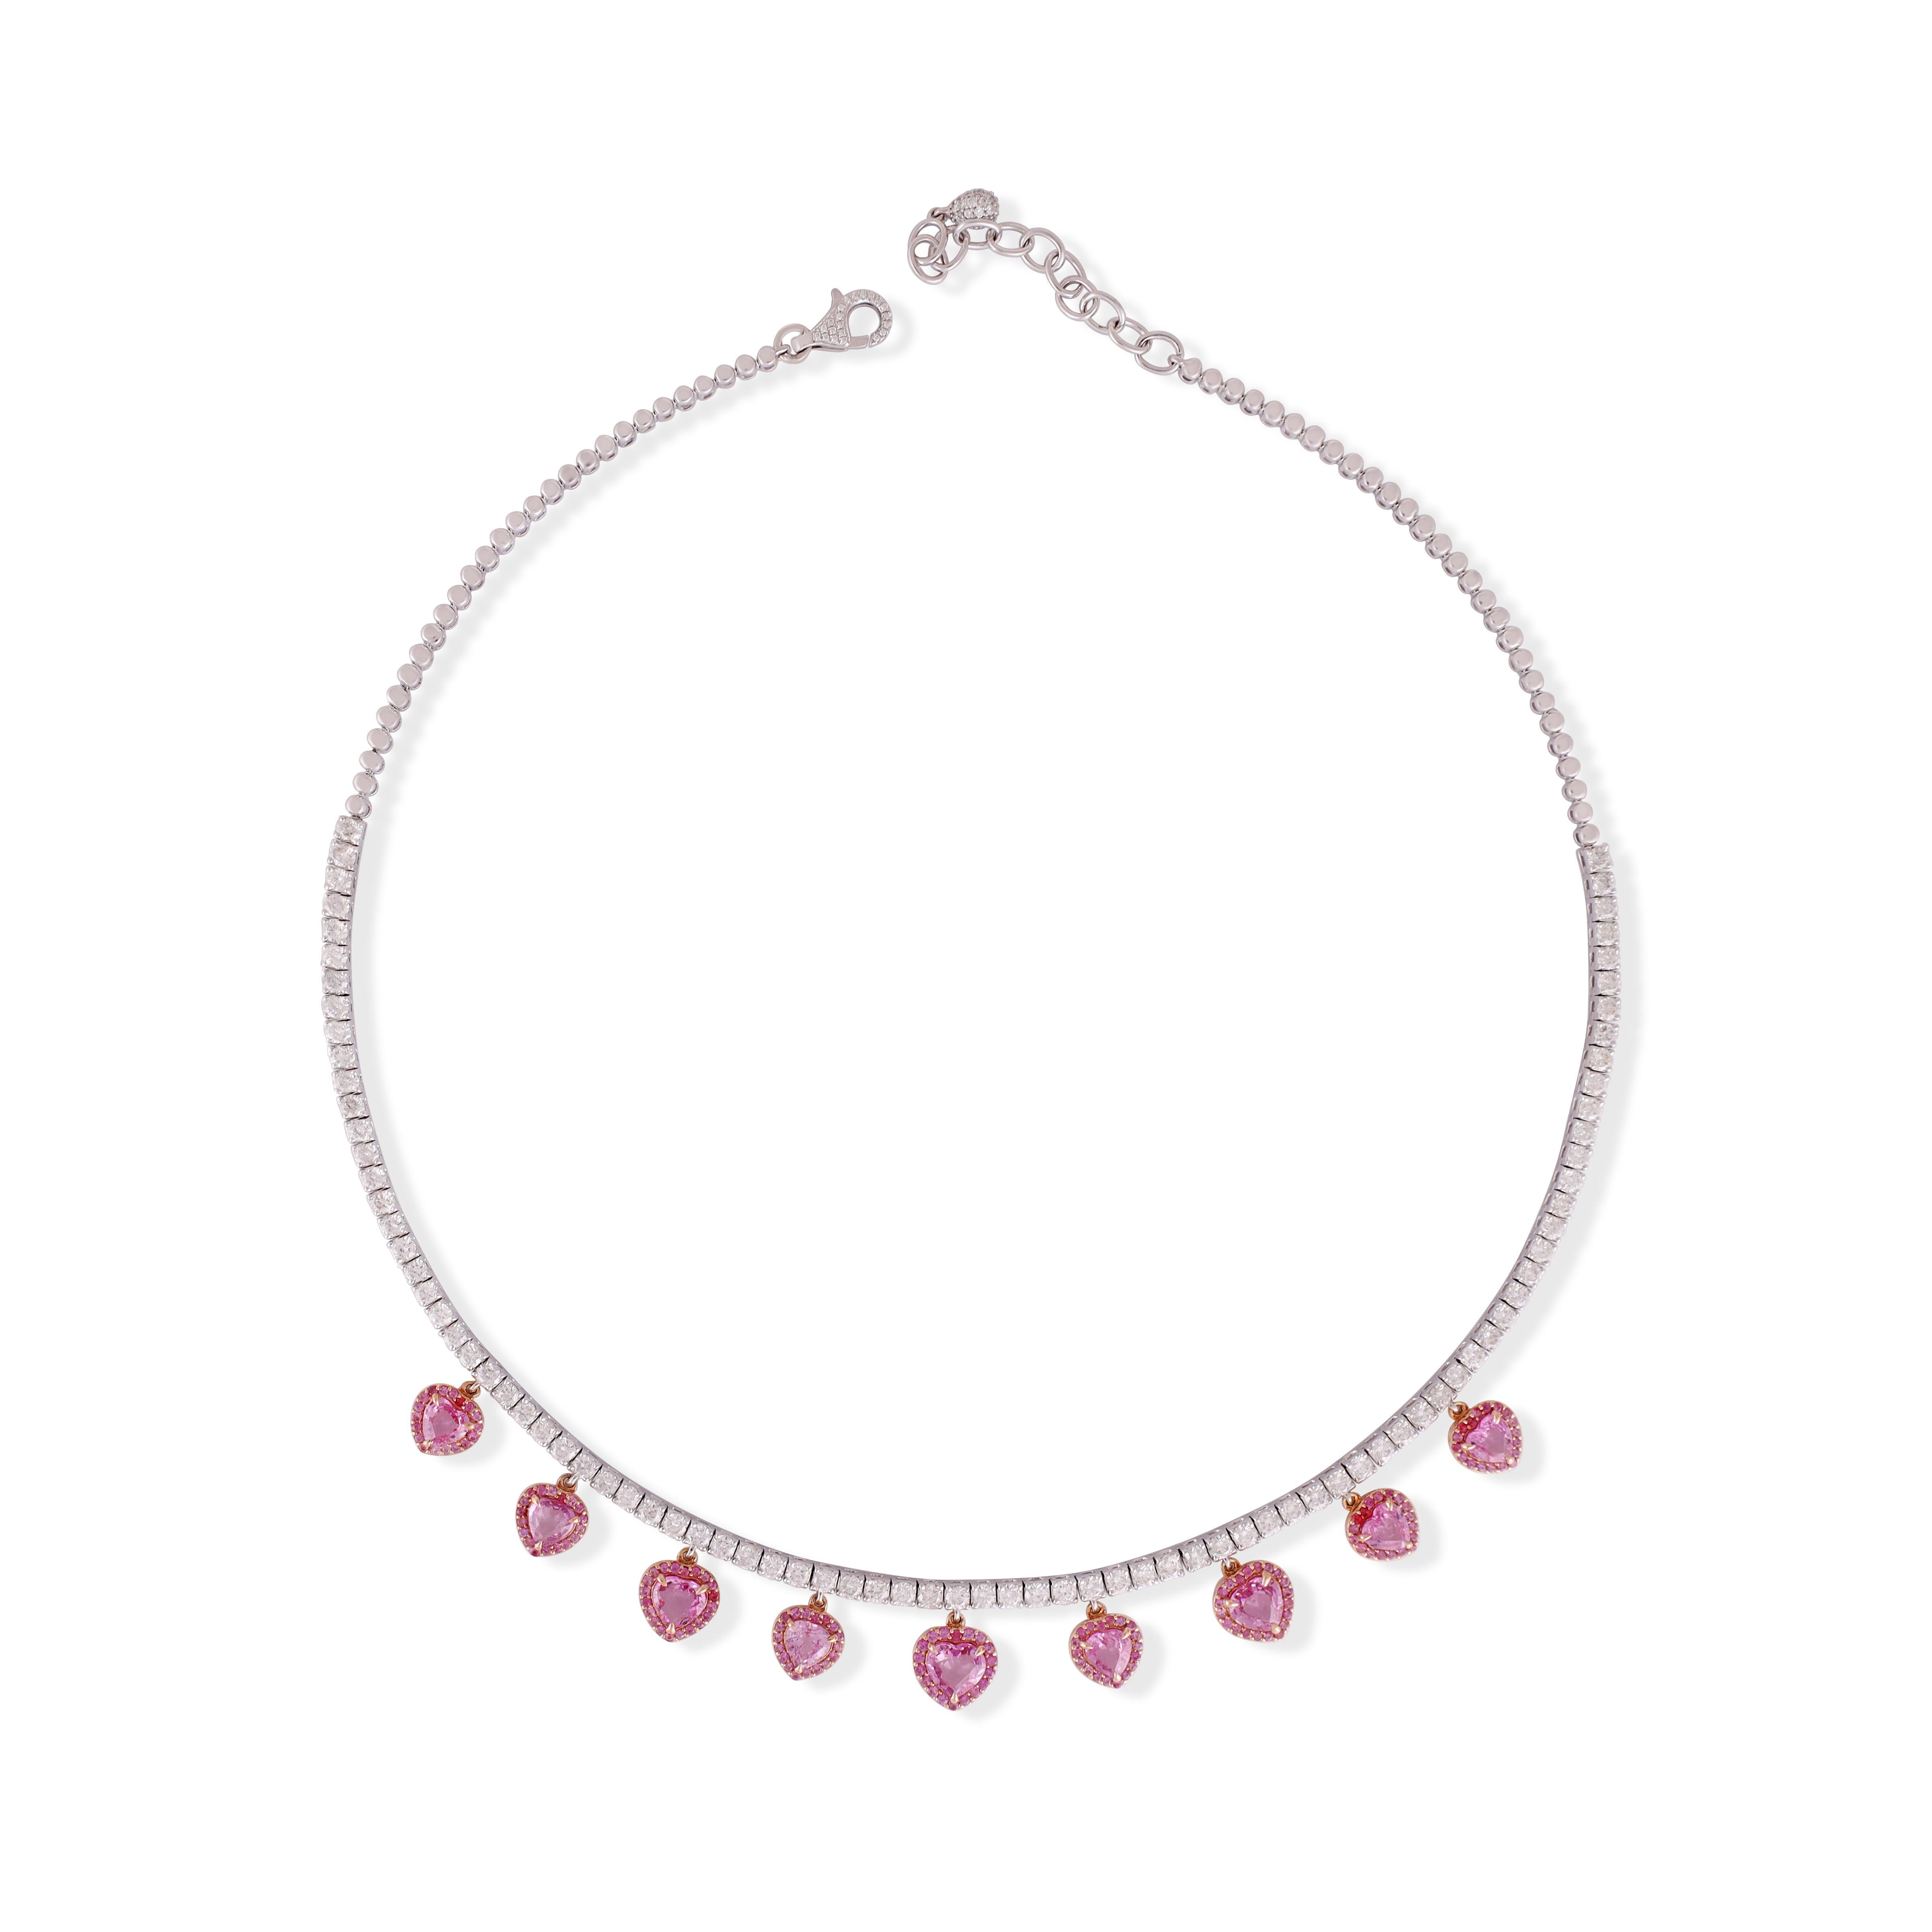 Mixed Cut 6.59 Carat Pink Sapphire & Diamond Chain Necklace in 18k White Gold For Sale